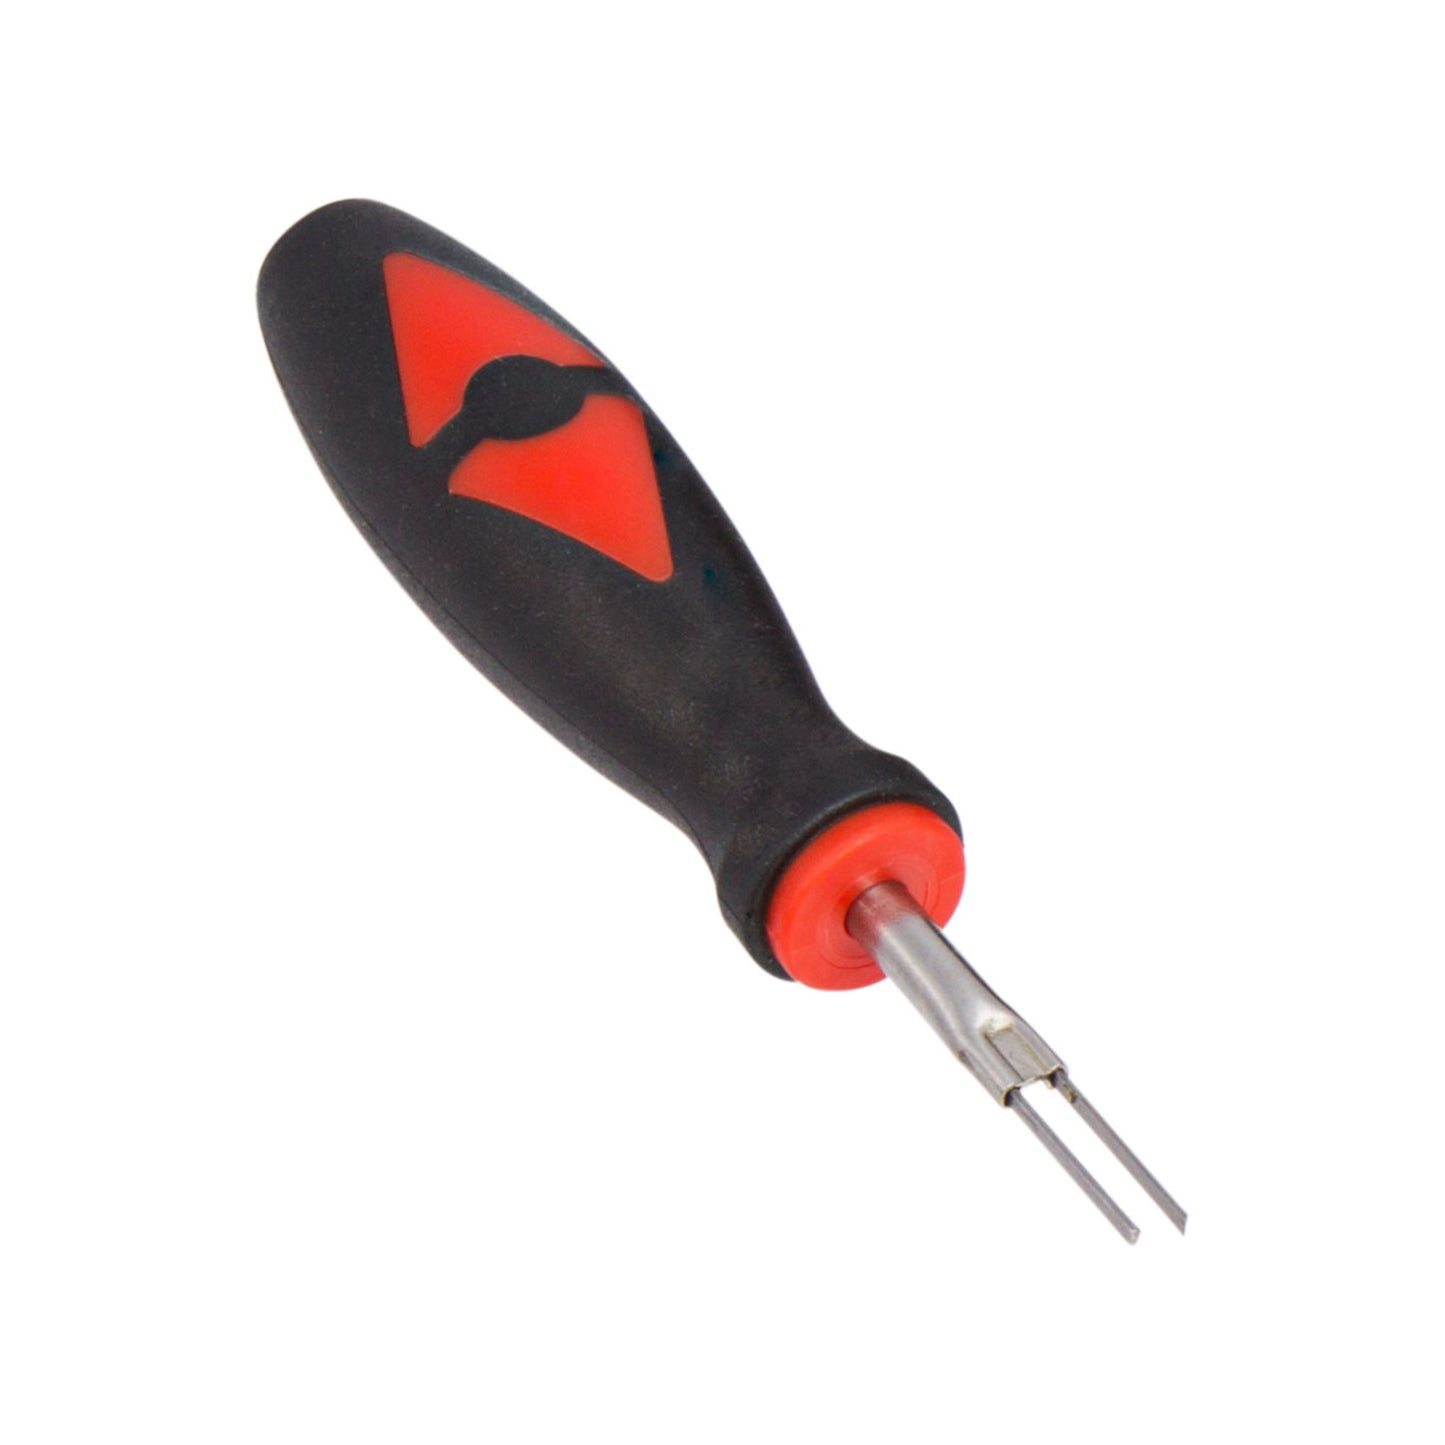 STEELMAN 1.60mm x 15.00mm Flat Twin Blade Automotive Terminal Tool designed to separate wires from their terminal blocks without causing damage to either